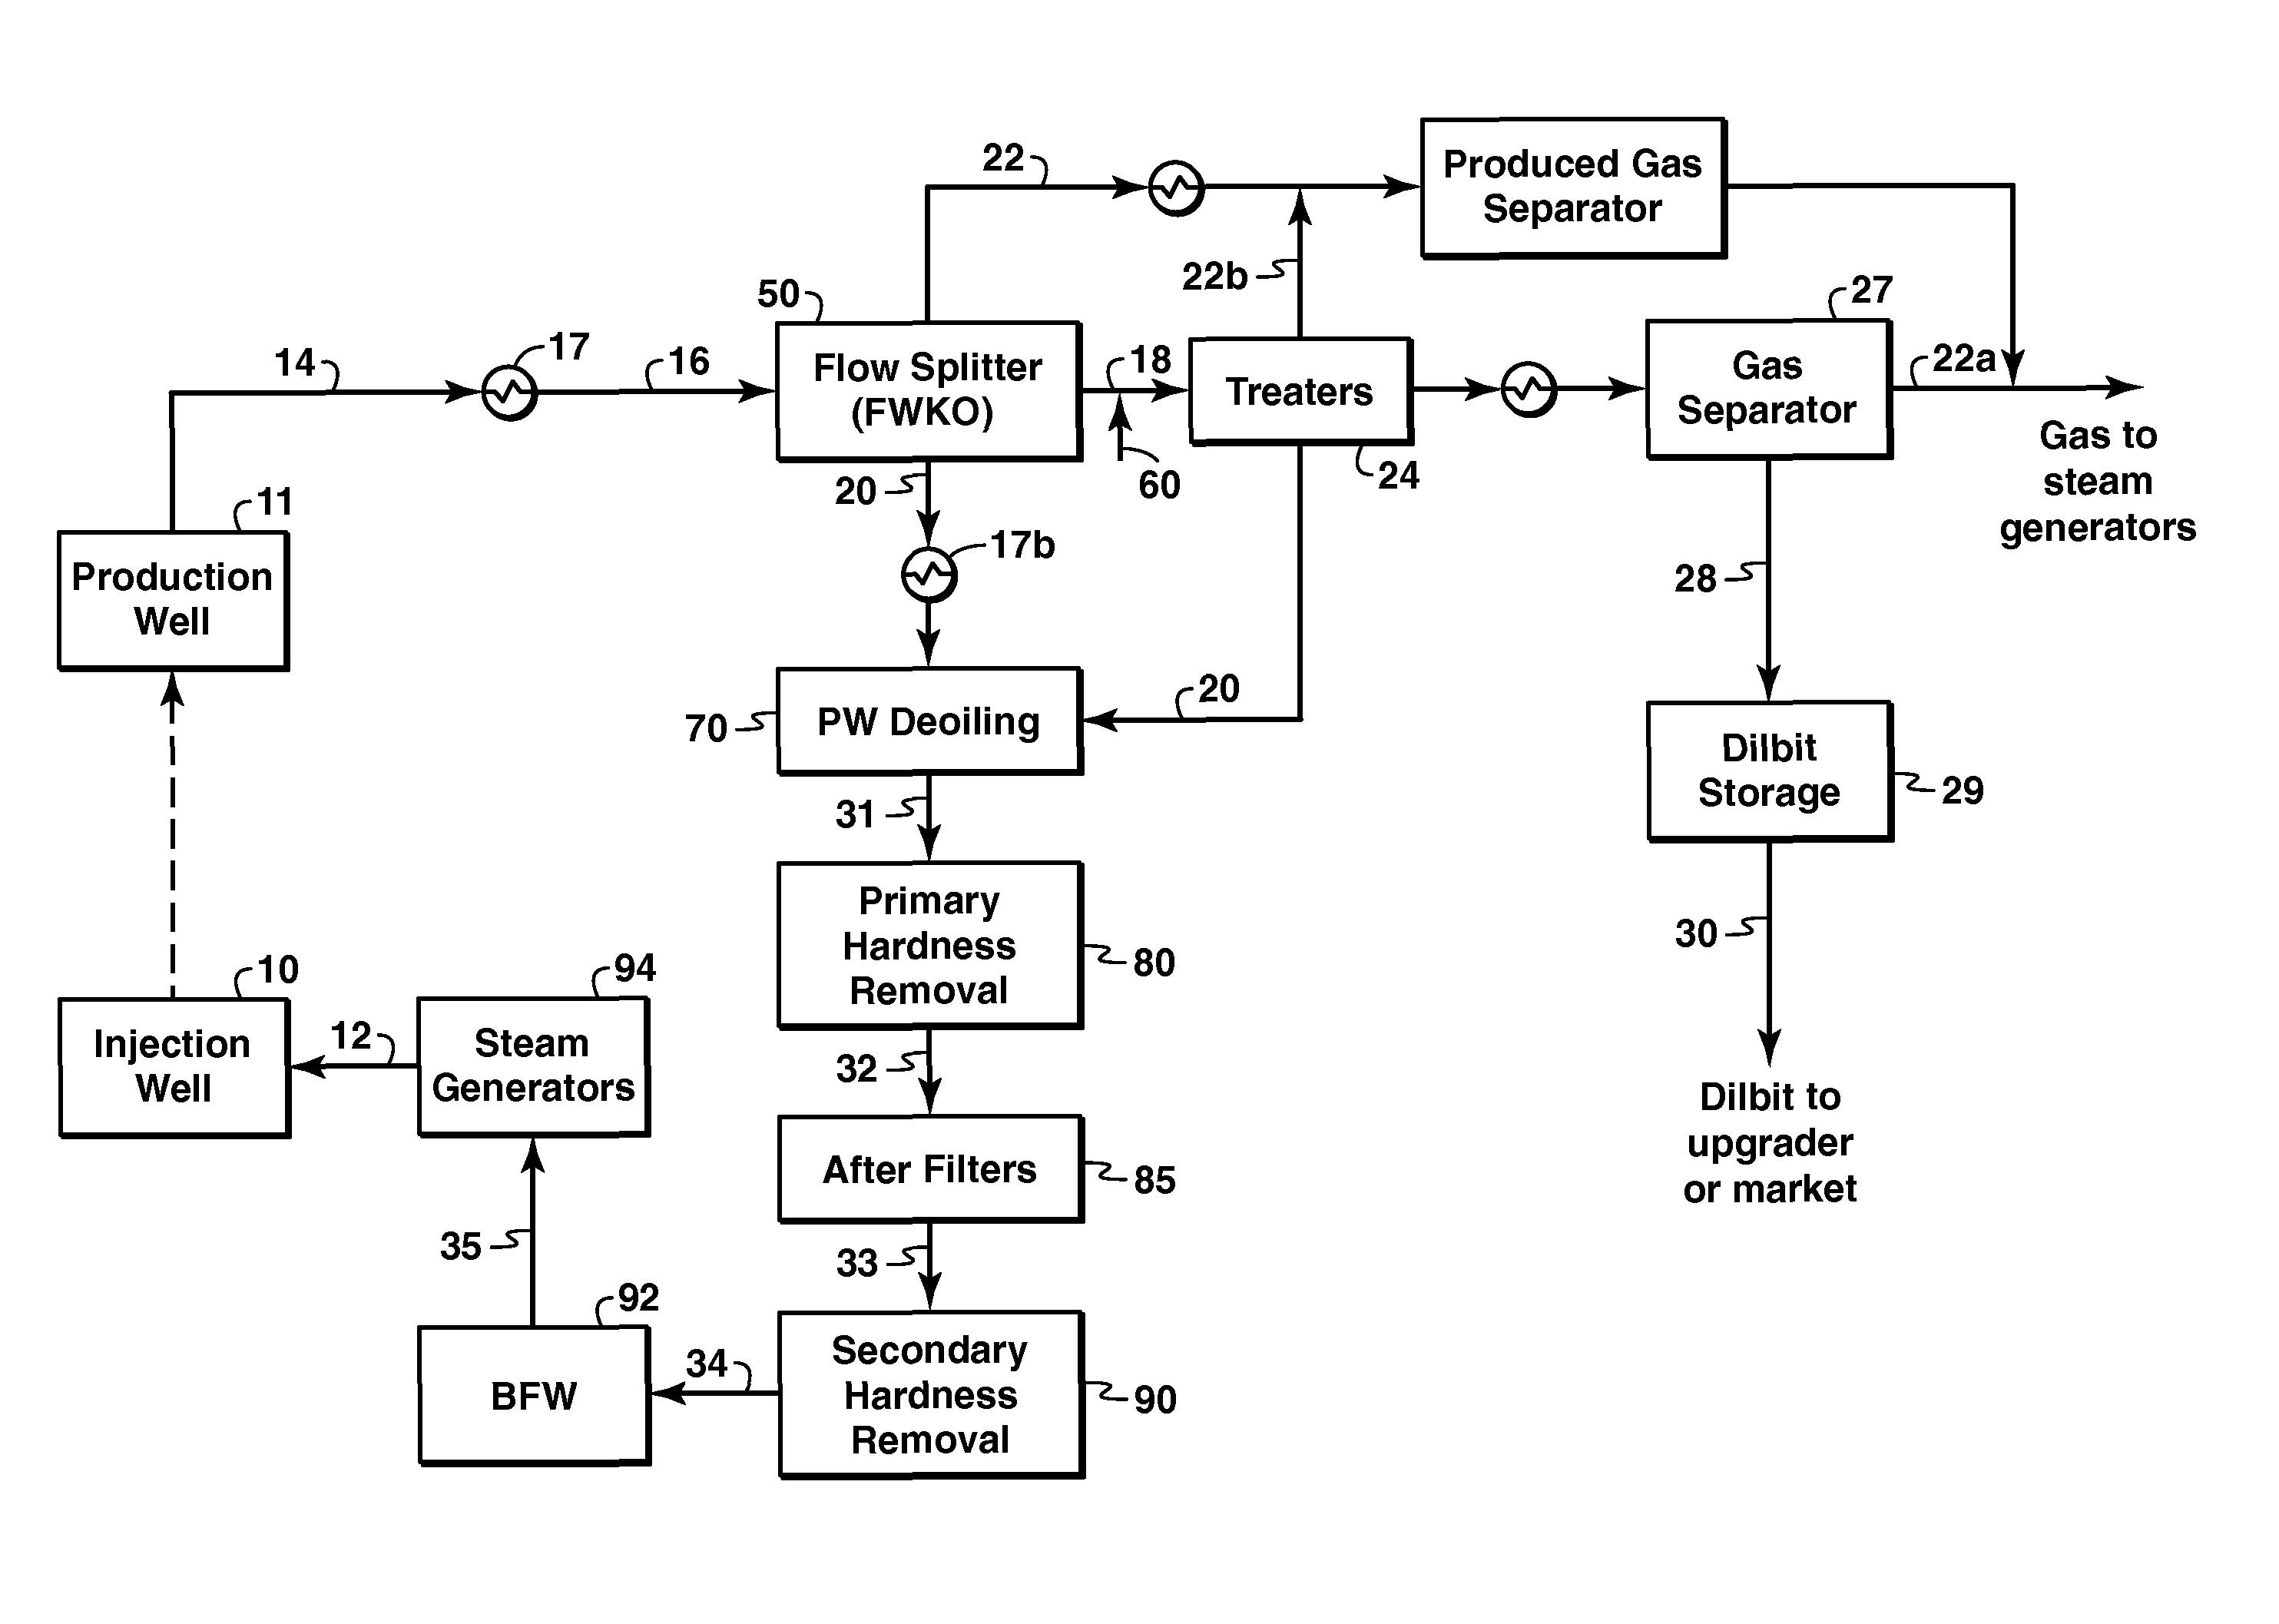 Integration of an in-situ recovery operation with a mining operation